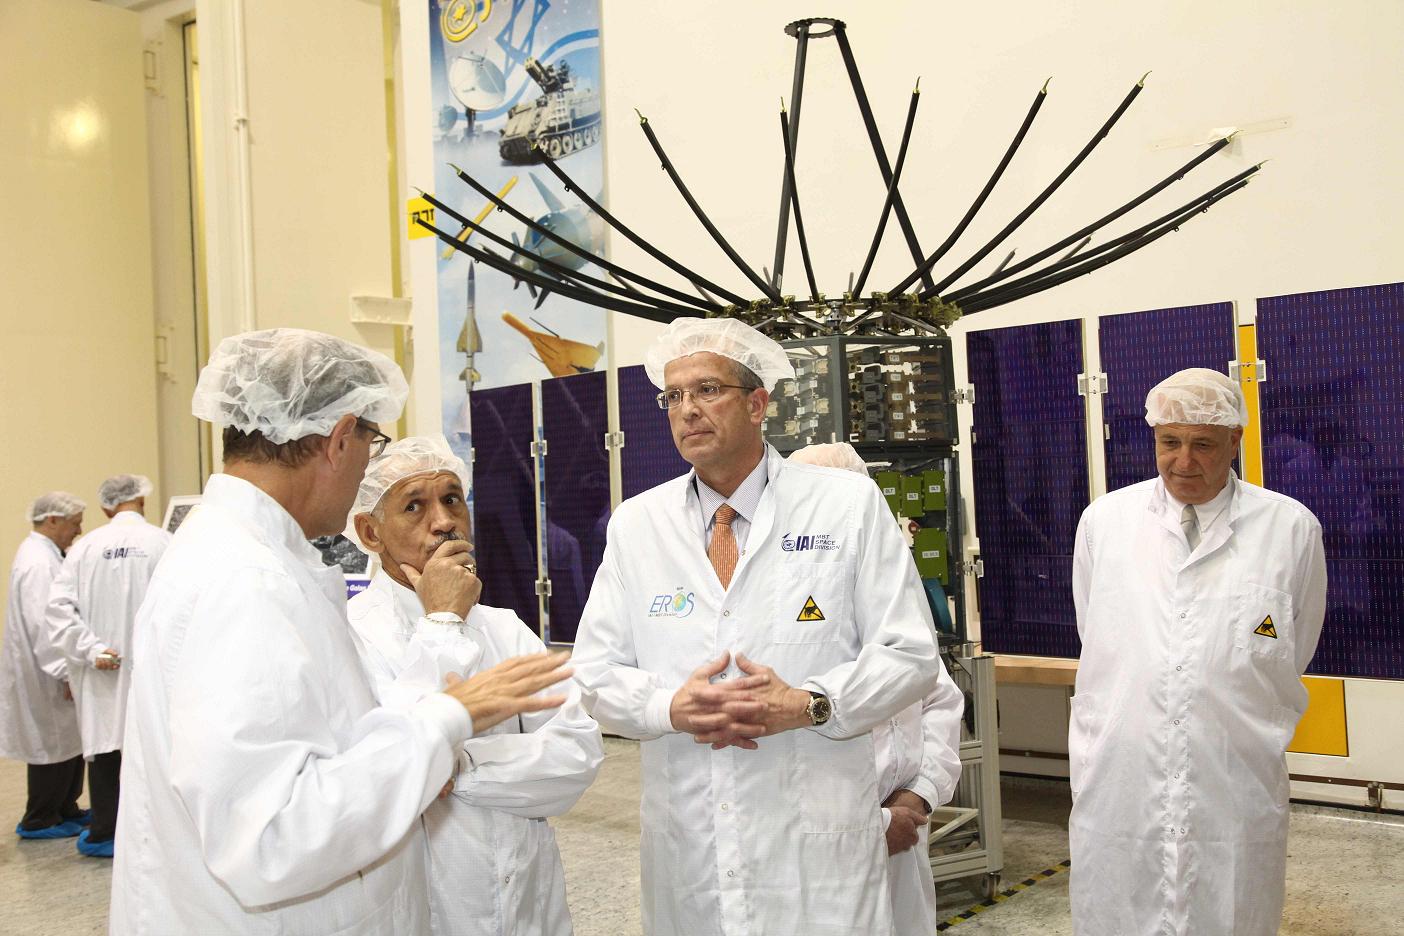 . NASA head Charles Bolden (second from the right) during his visit to the aerospace industry against the background of the "Texar" satellite, Yossi Weiss, VP of the TAA and director of the Missile and Space Department (third from the left) and Aryeh Halzband, director of the space plant (first from the left).